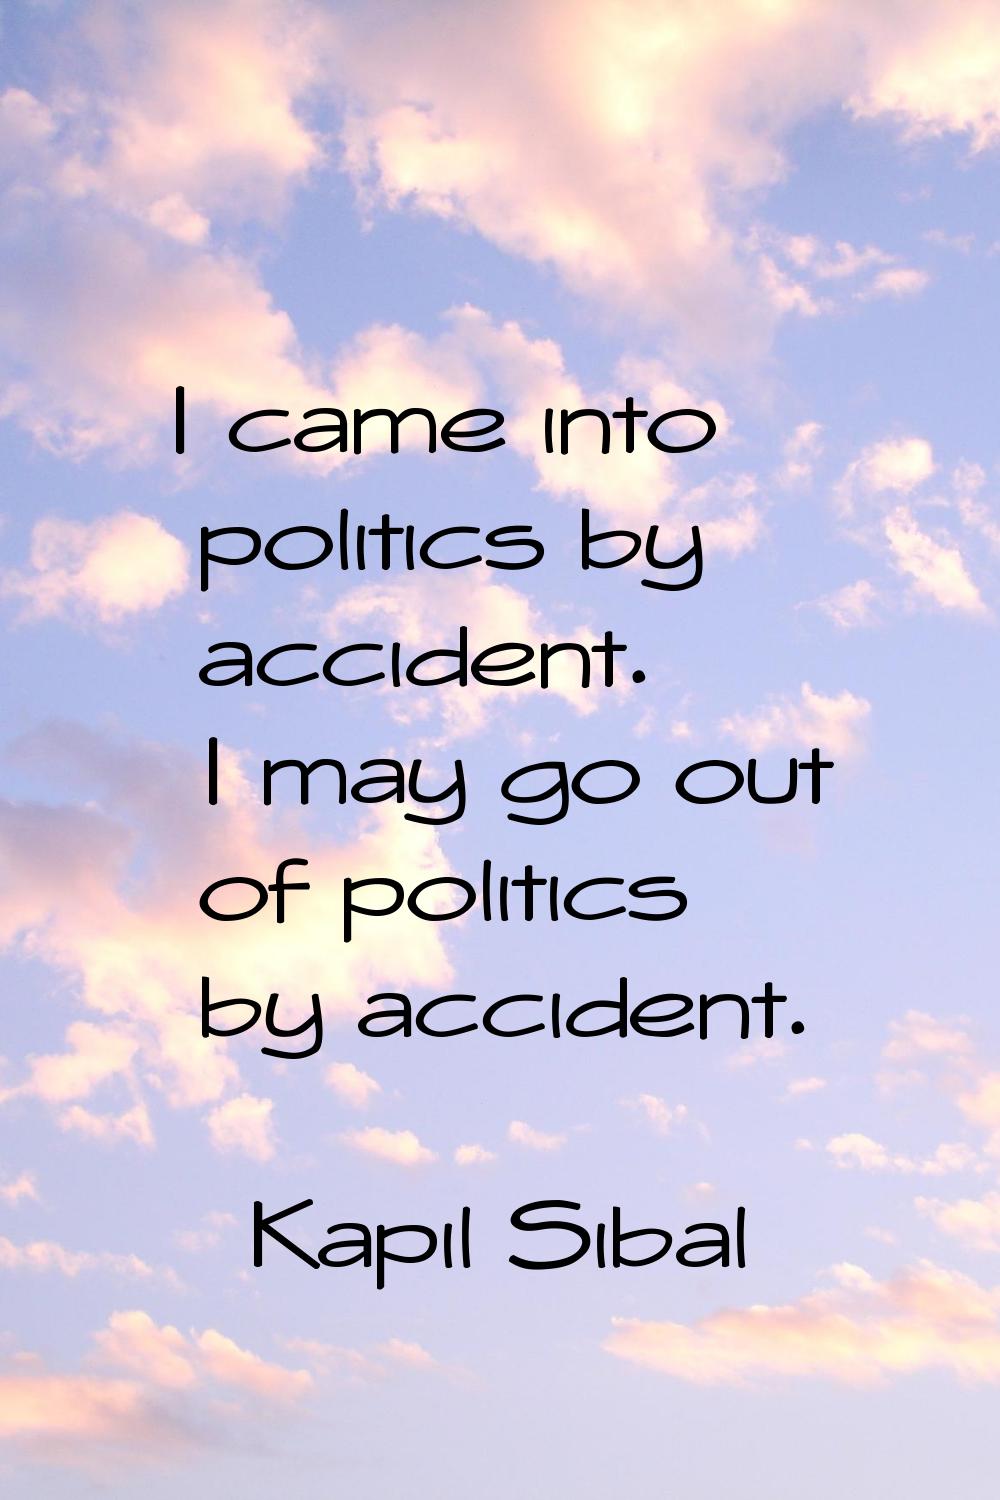 I came into politics by accident. I may go out of politics by accident.